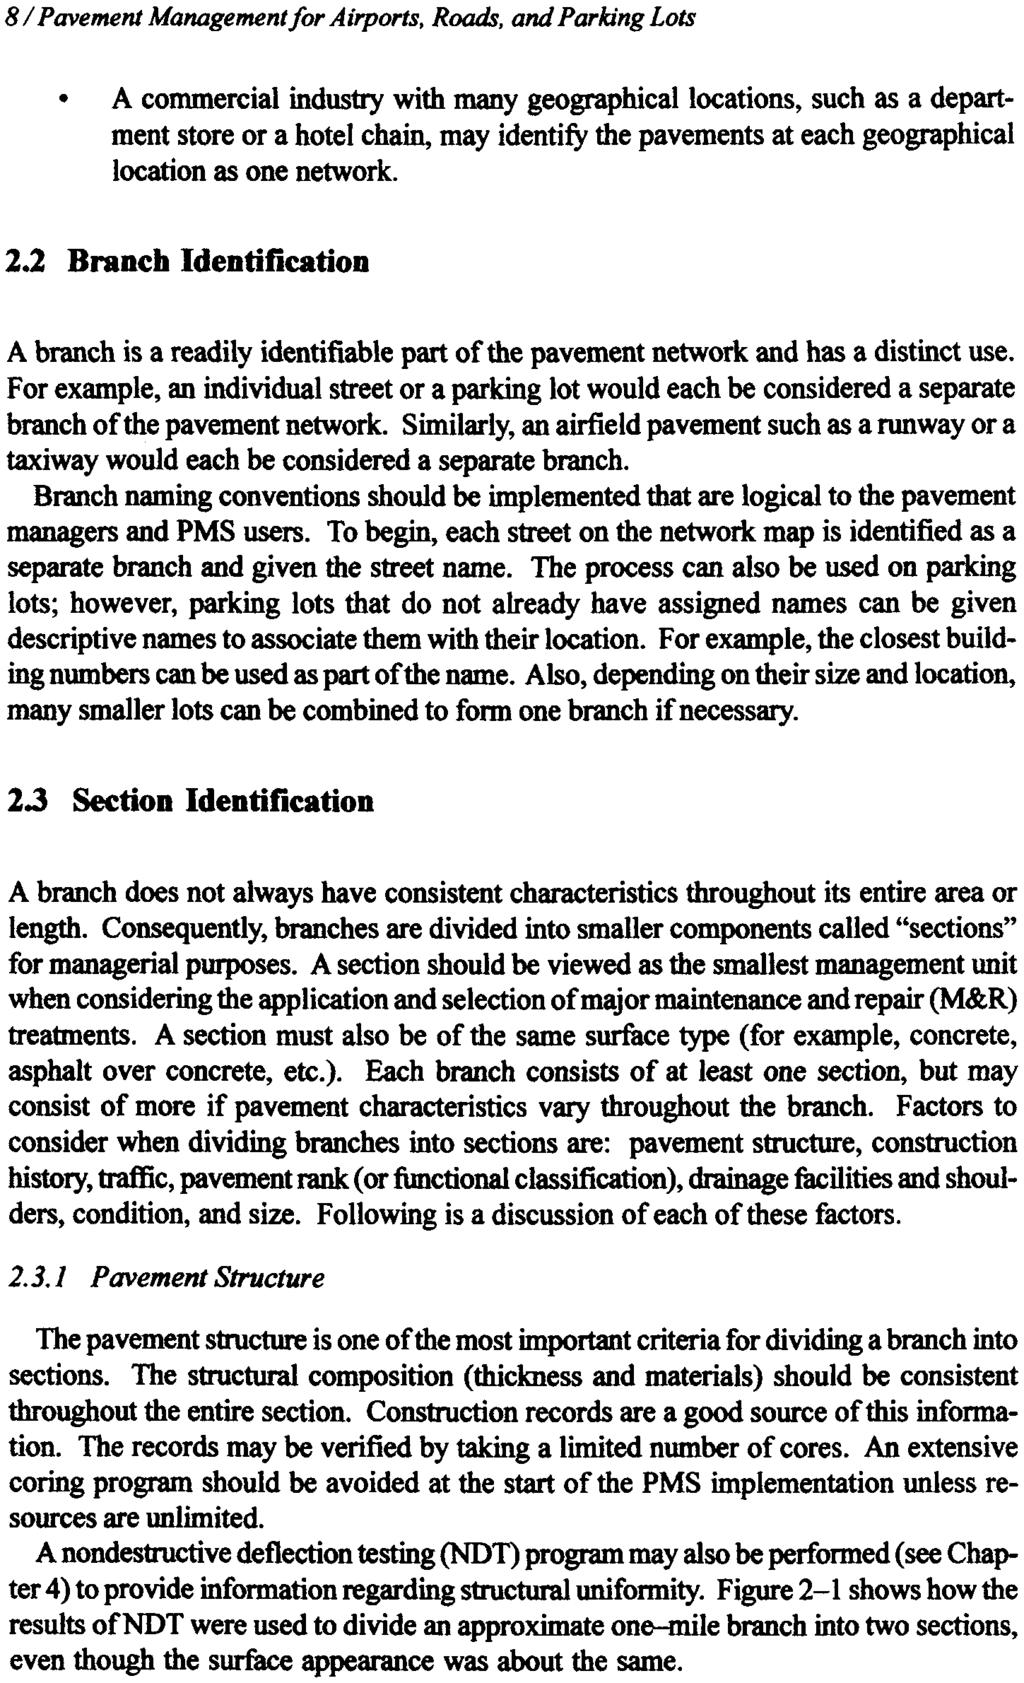 8/Pavement Management for Airports, Roads, and Parking Lots A commercial industry with many geographical locations, such as a department store or a hotel chain, may identify the pavements at each